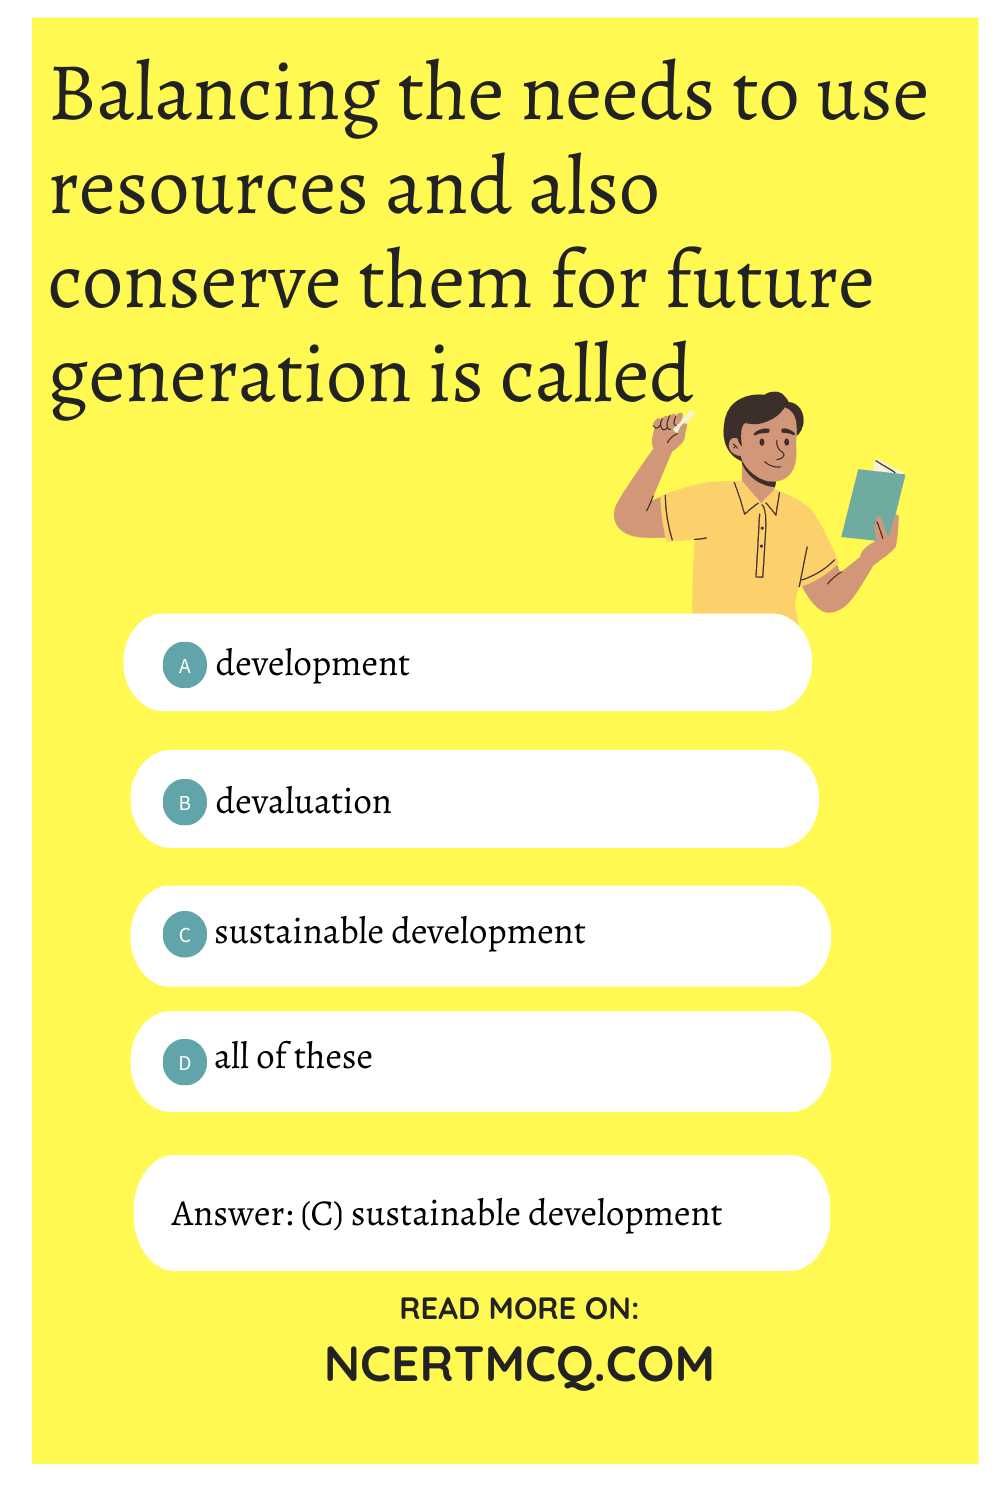 Balancing the needs to use resources and also conserve them for future generation is called